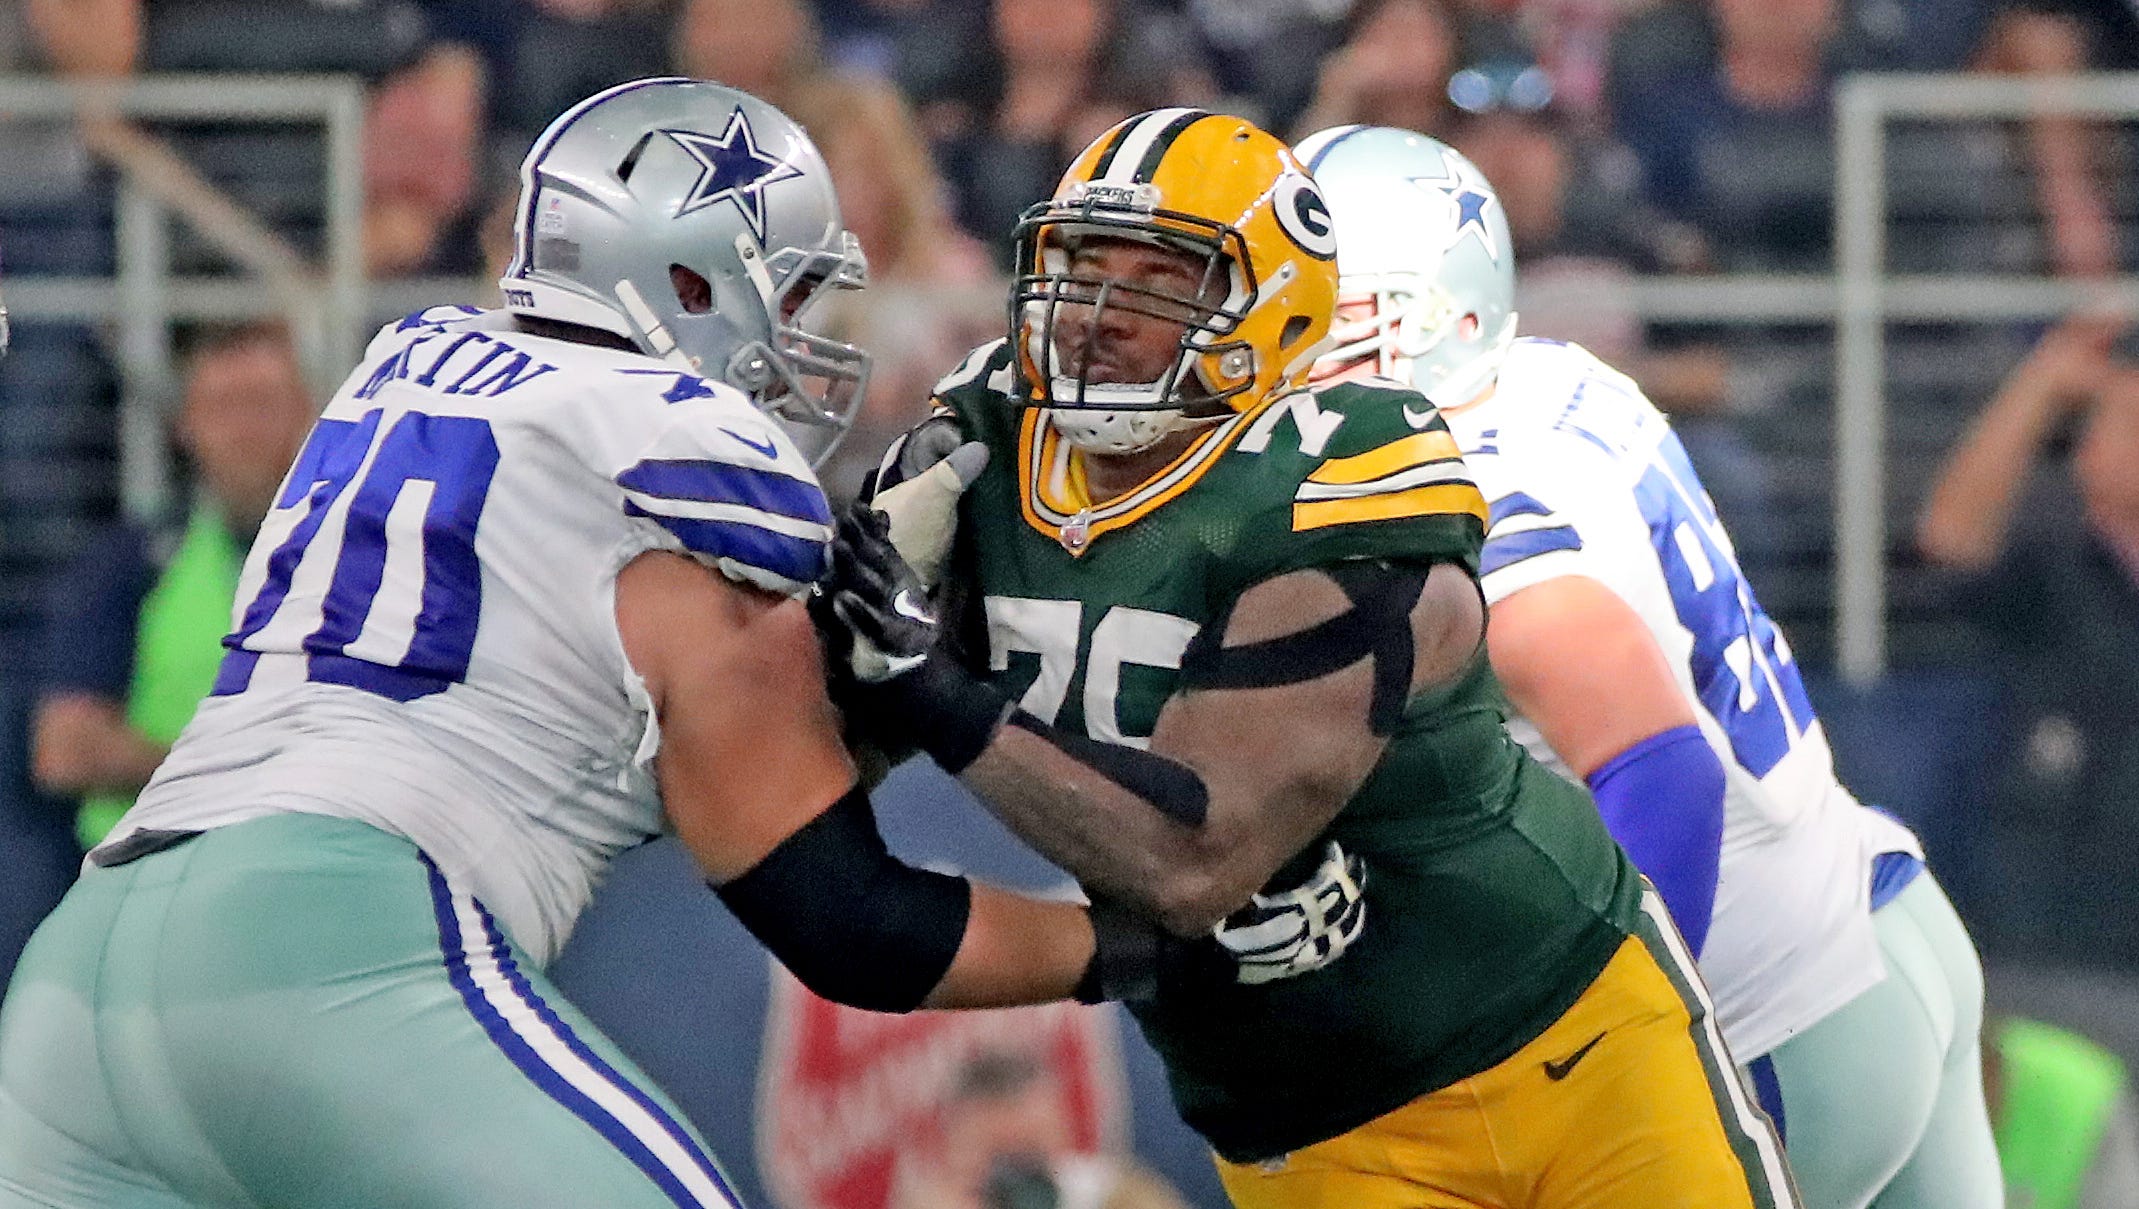 Green Bay Packers defensive end Mike Daniels (76) drives against Dallas Cowboys offensive guard Zack Martin (70) on Oct. 8, 2017, at AT&T Stadium in Arlington, Tx.